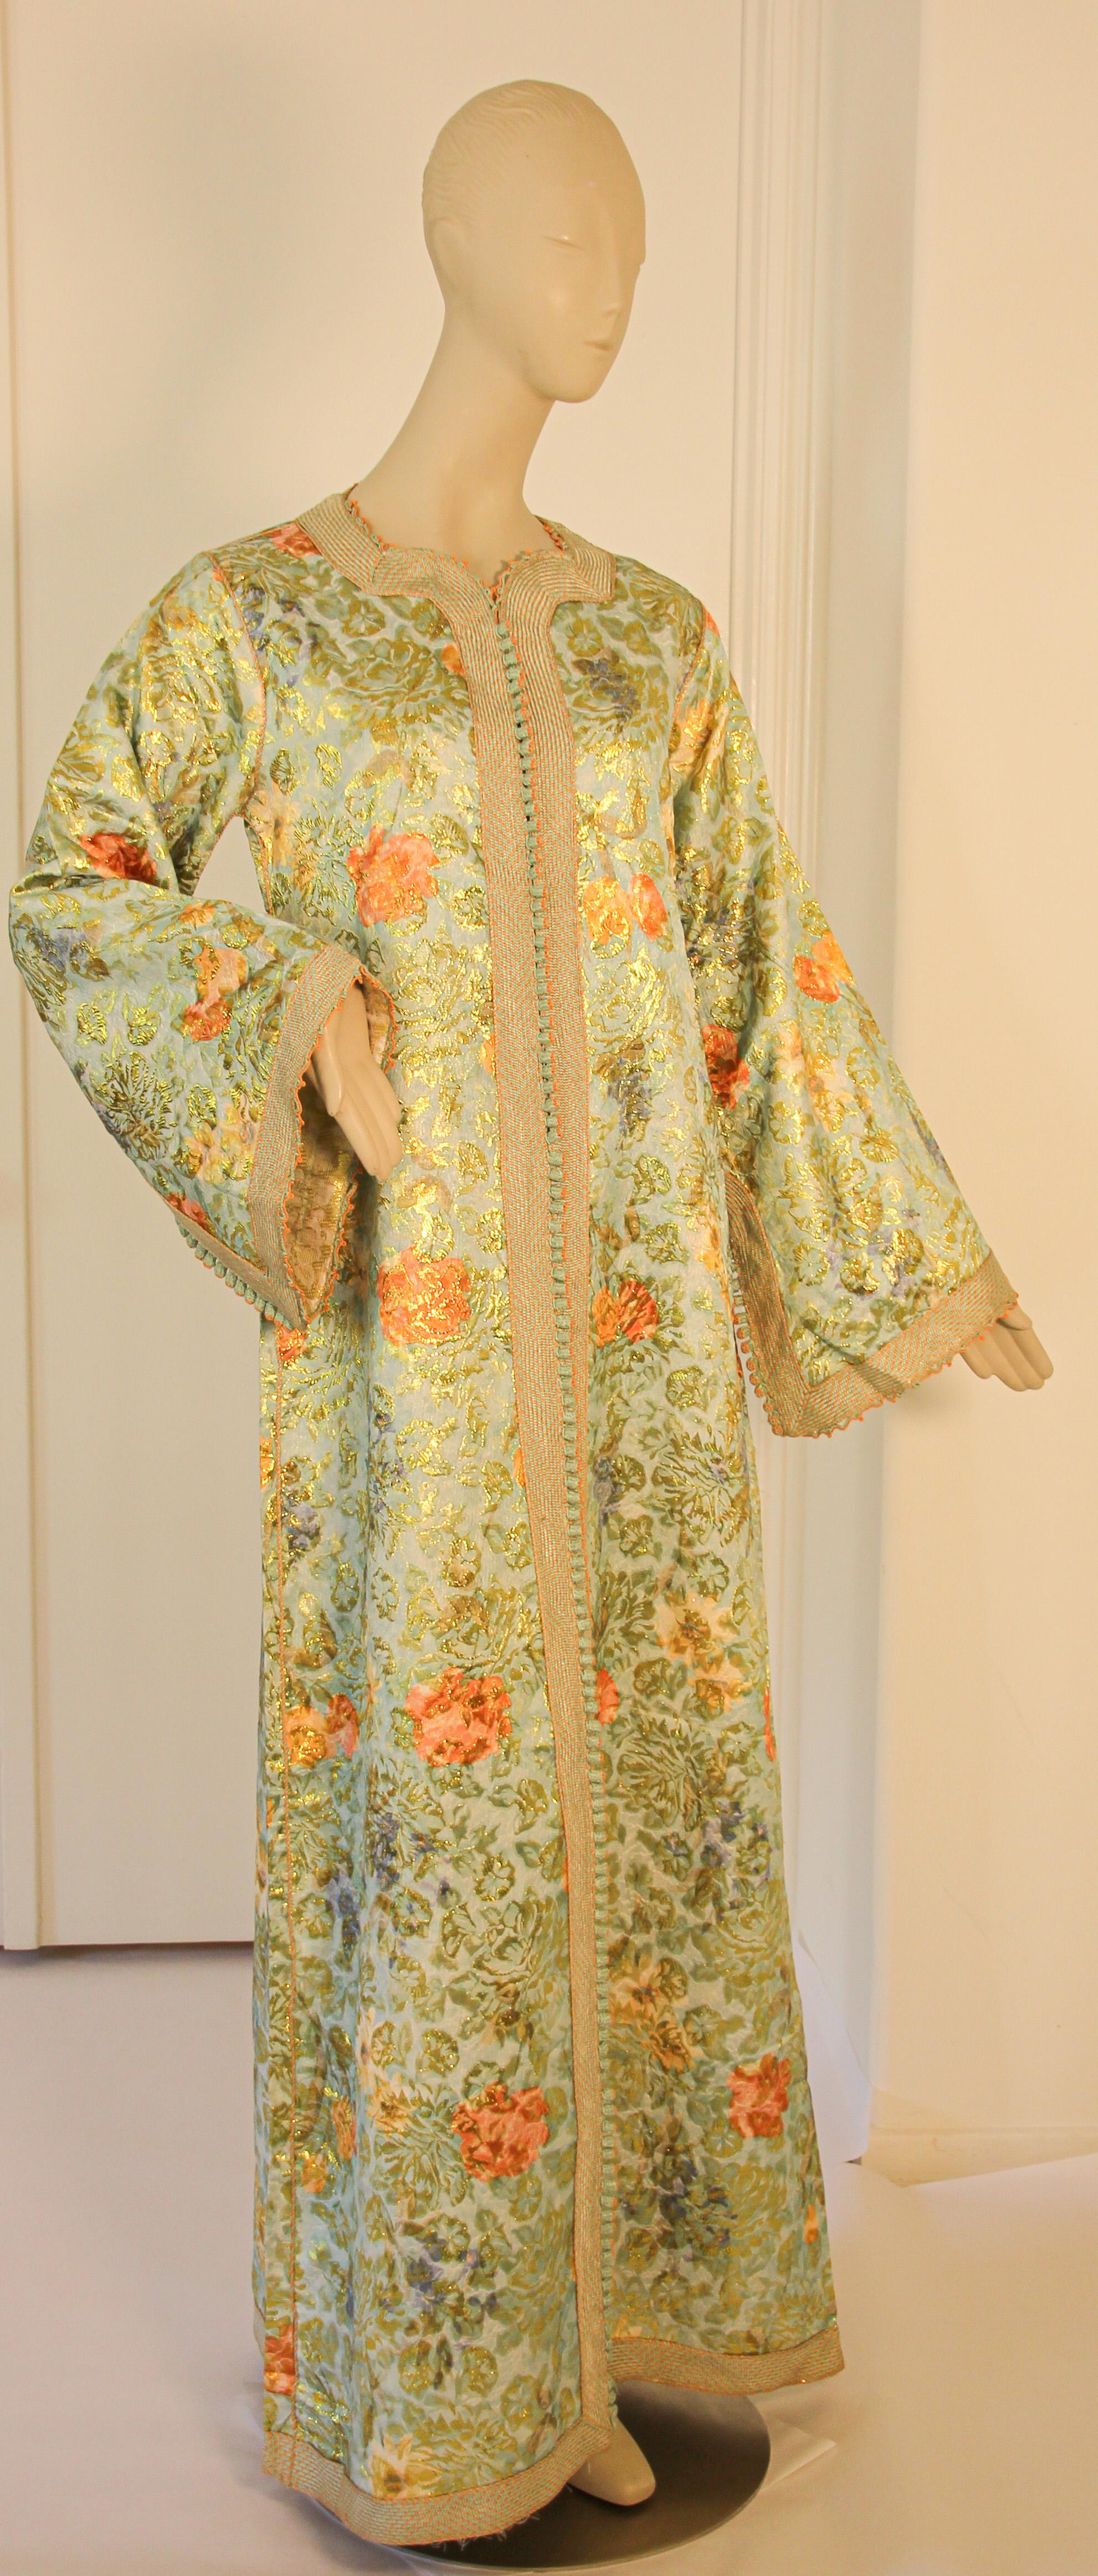 Elegant Moroccan caftan lime green and gold lame metallic floral brocade,
This is an exceptional example of Moroccan fashion design.
Handcrafted in Morocco and tailored for a relaxed fit with wide sleeves, it is made in the traditional form of a